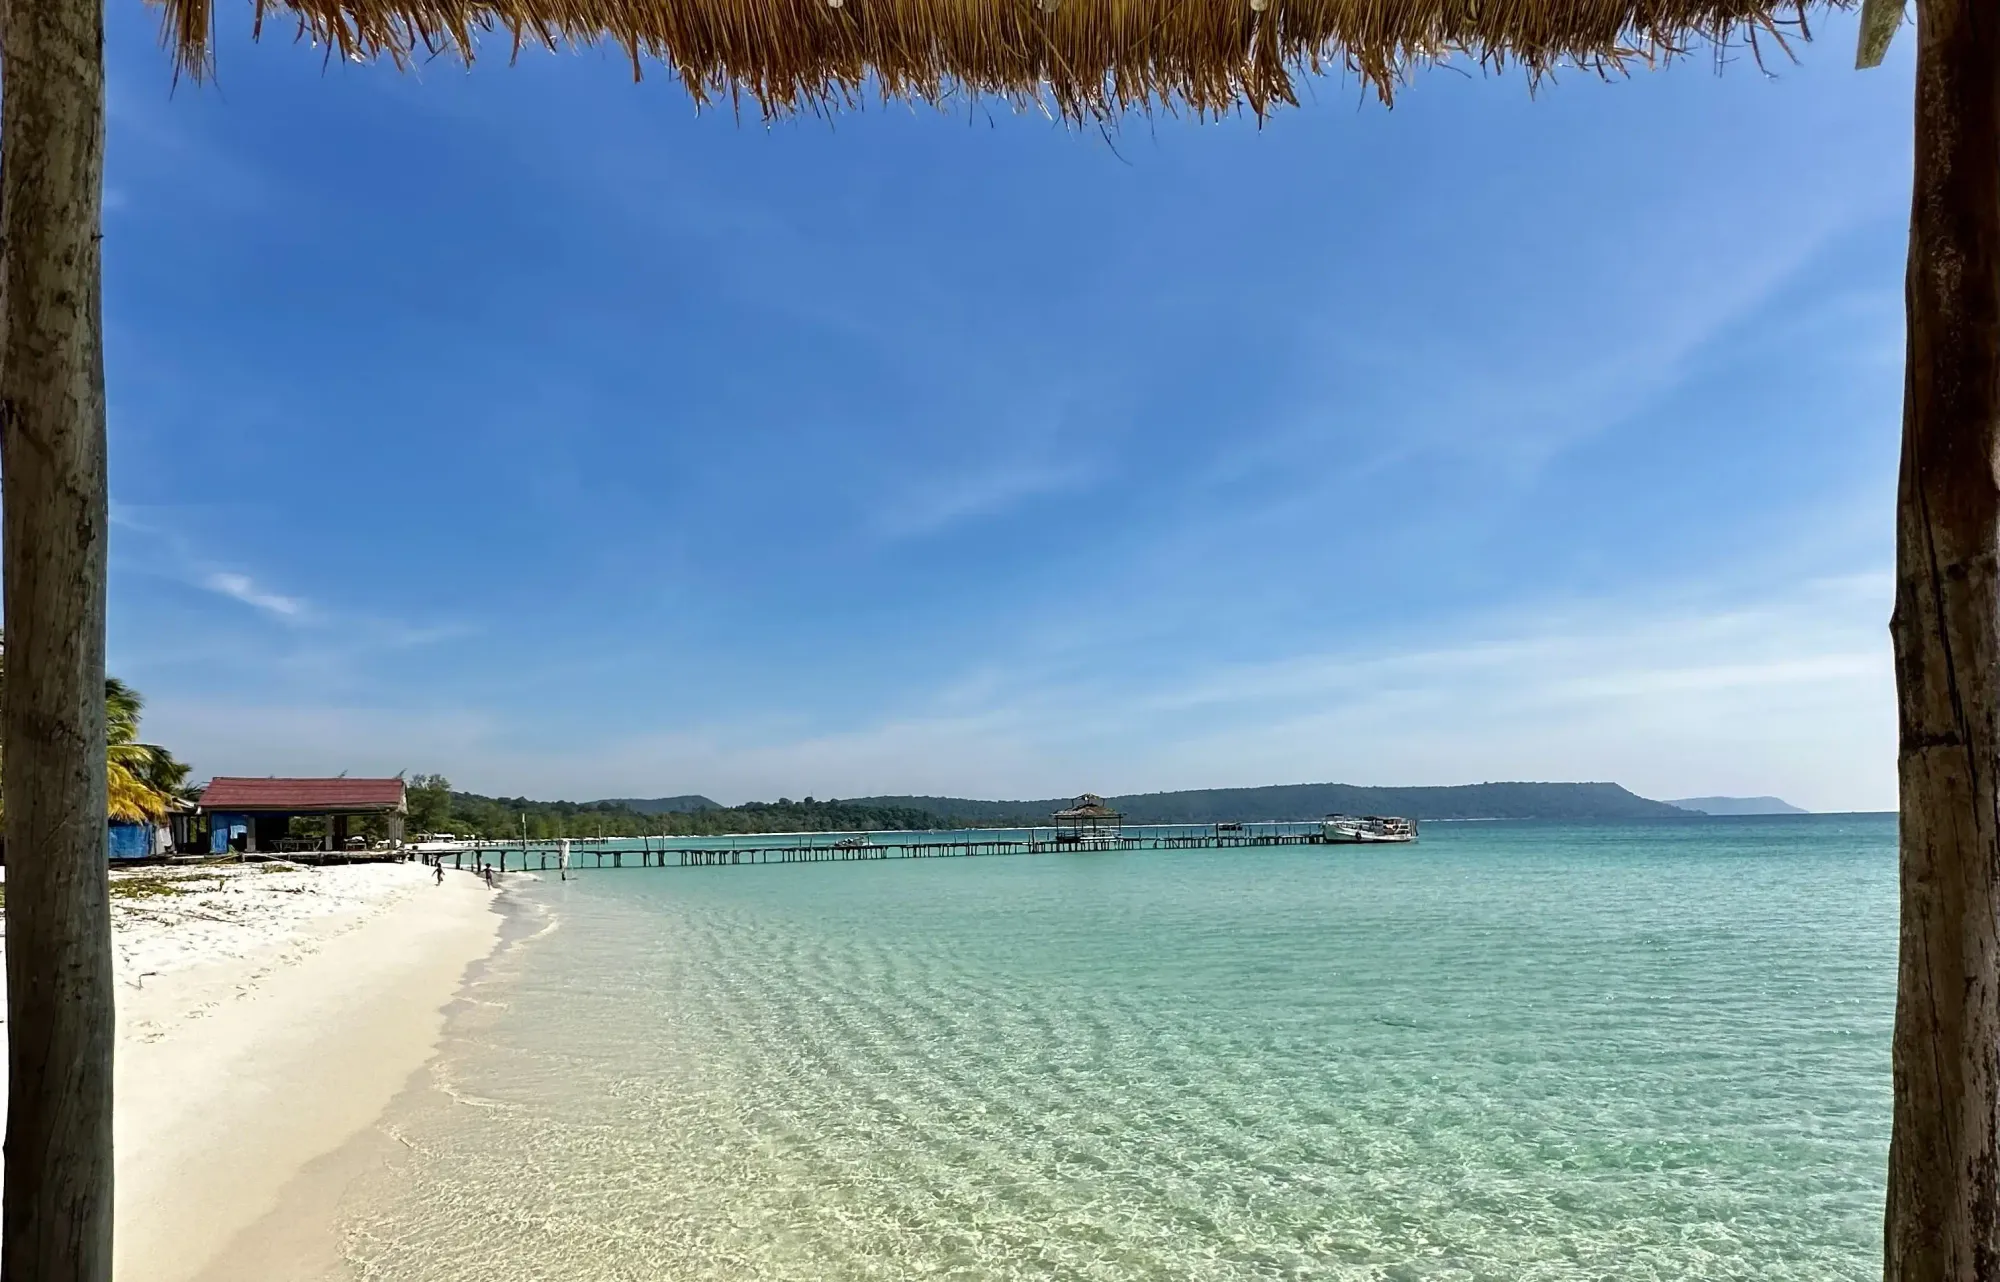 Koh Rong Island in Cambodia